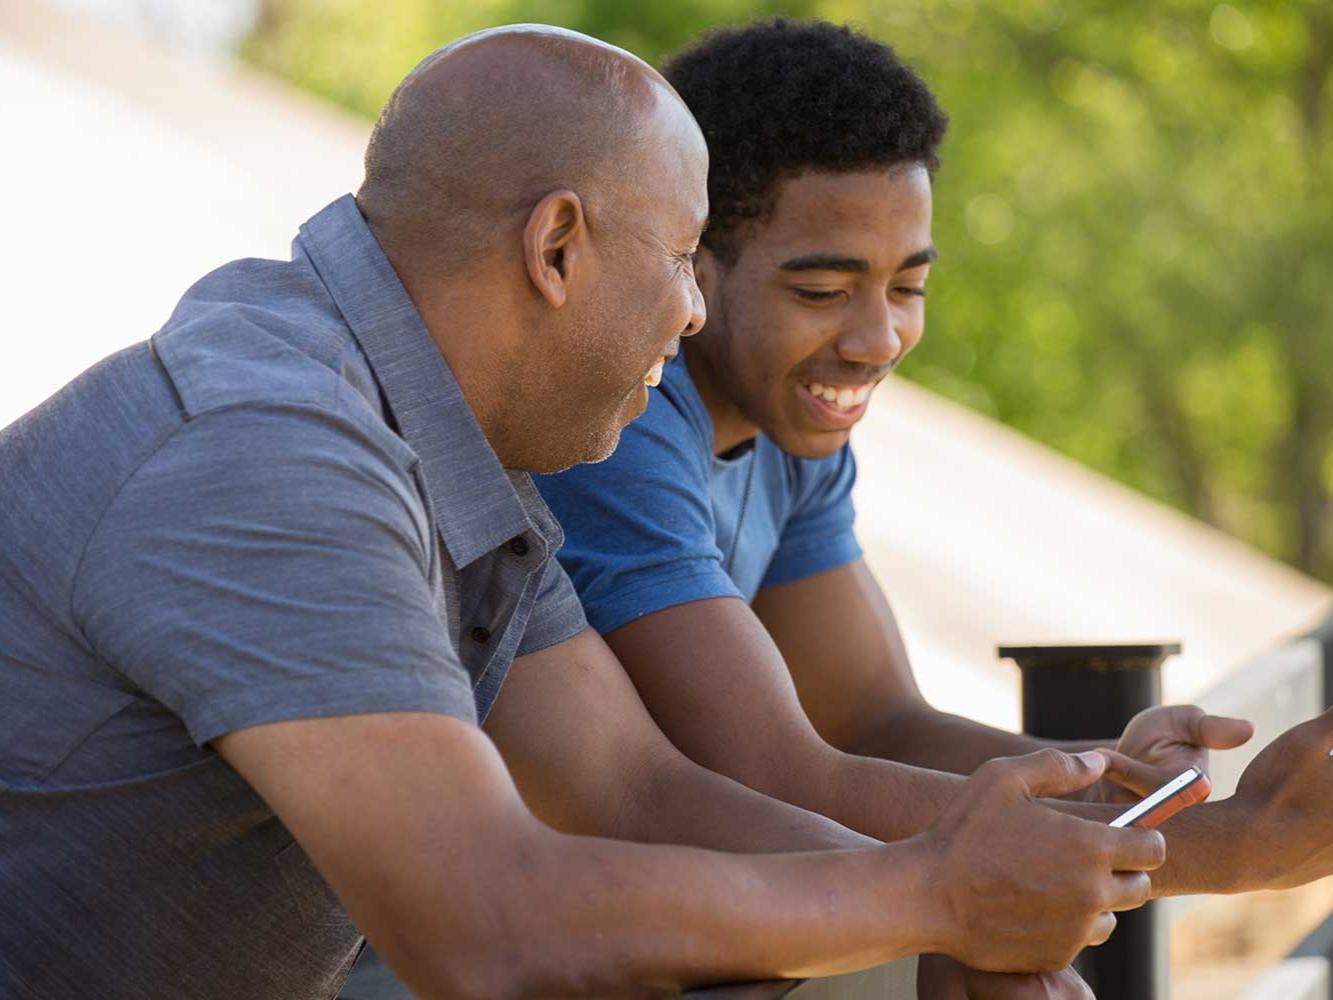 Parenting teens: Is there an app for that?